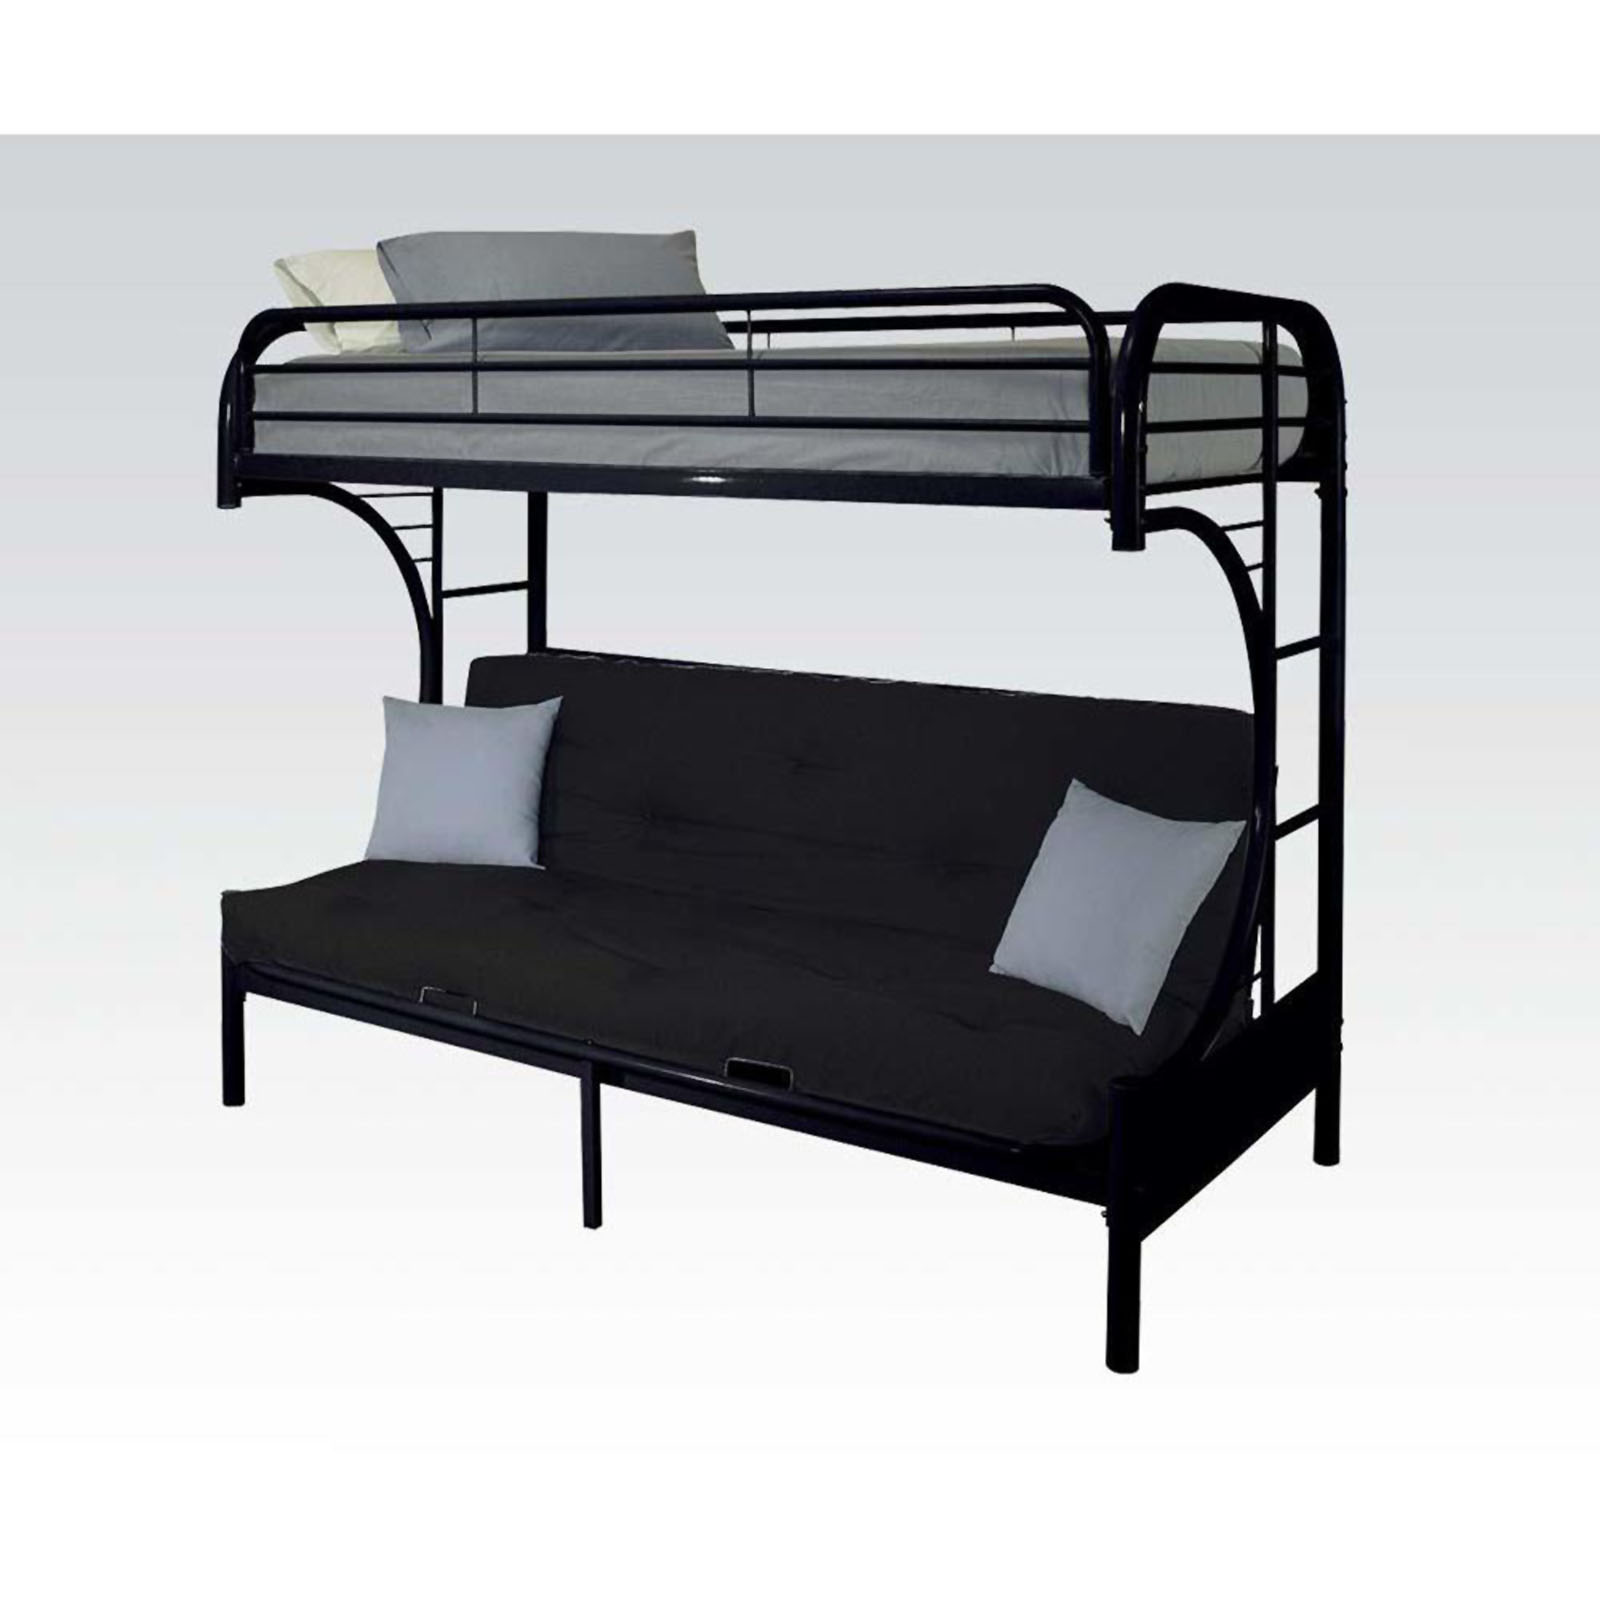 Acme Furniture Eclipse Twin Over Full, Eclipse Twin Over Full Futon Bunk Bed Replacement Parts